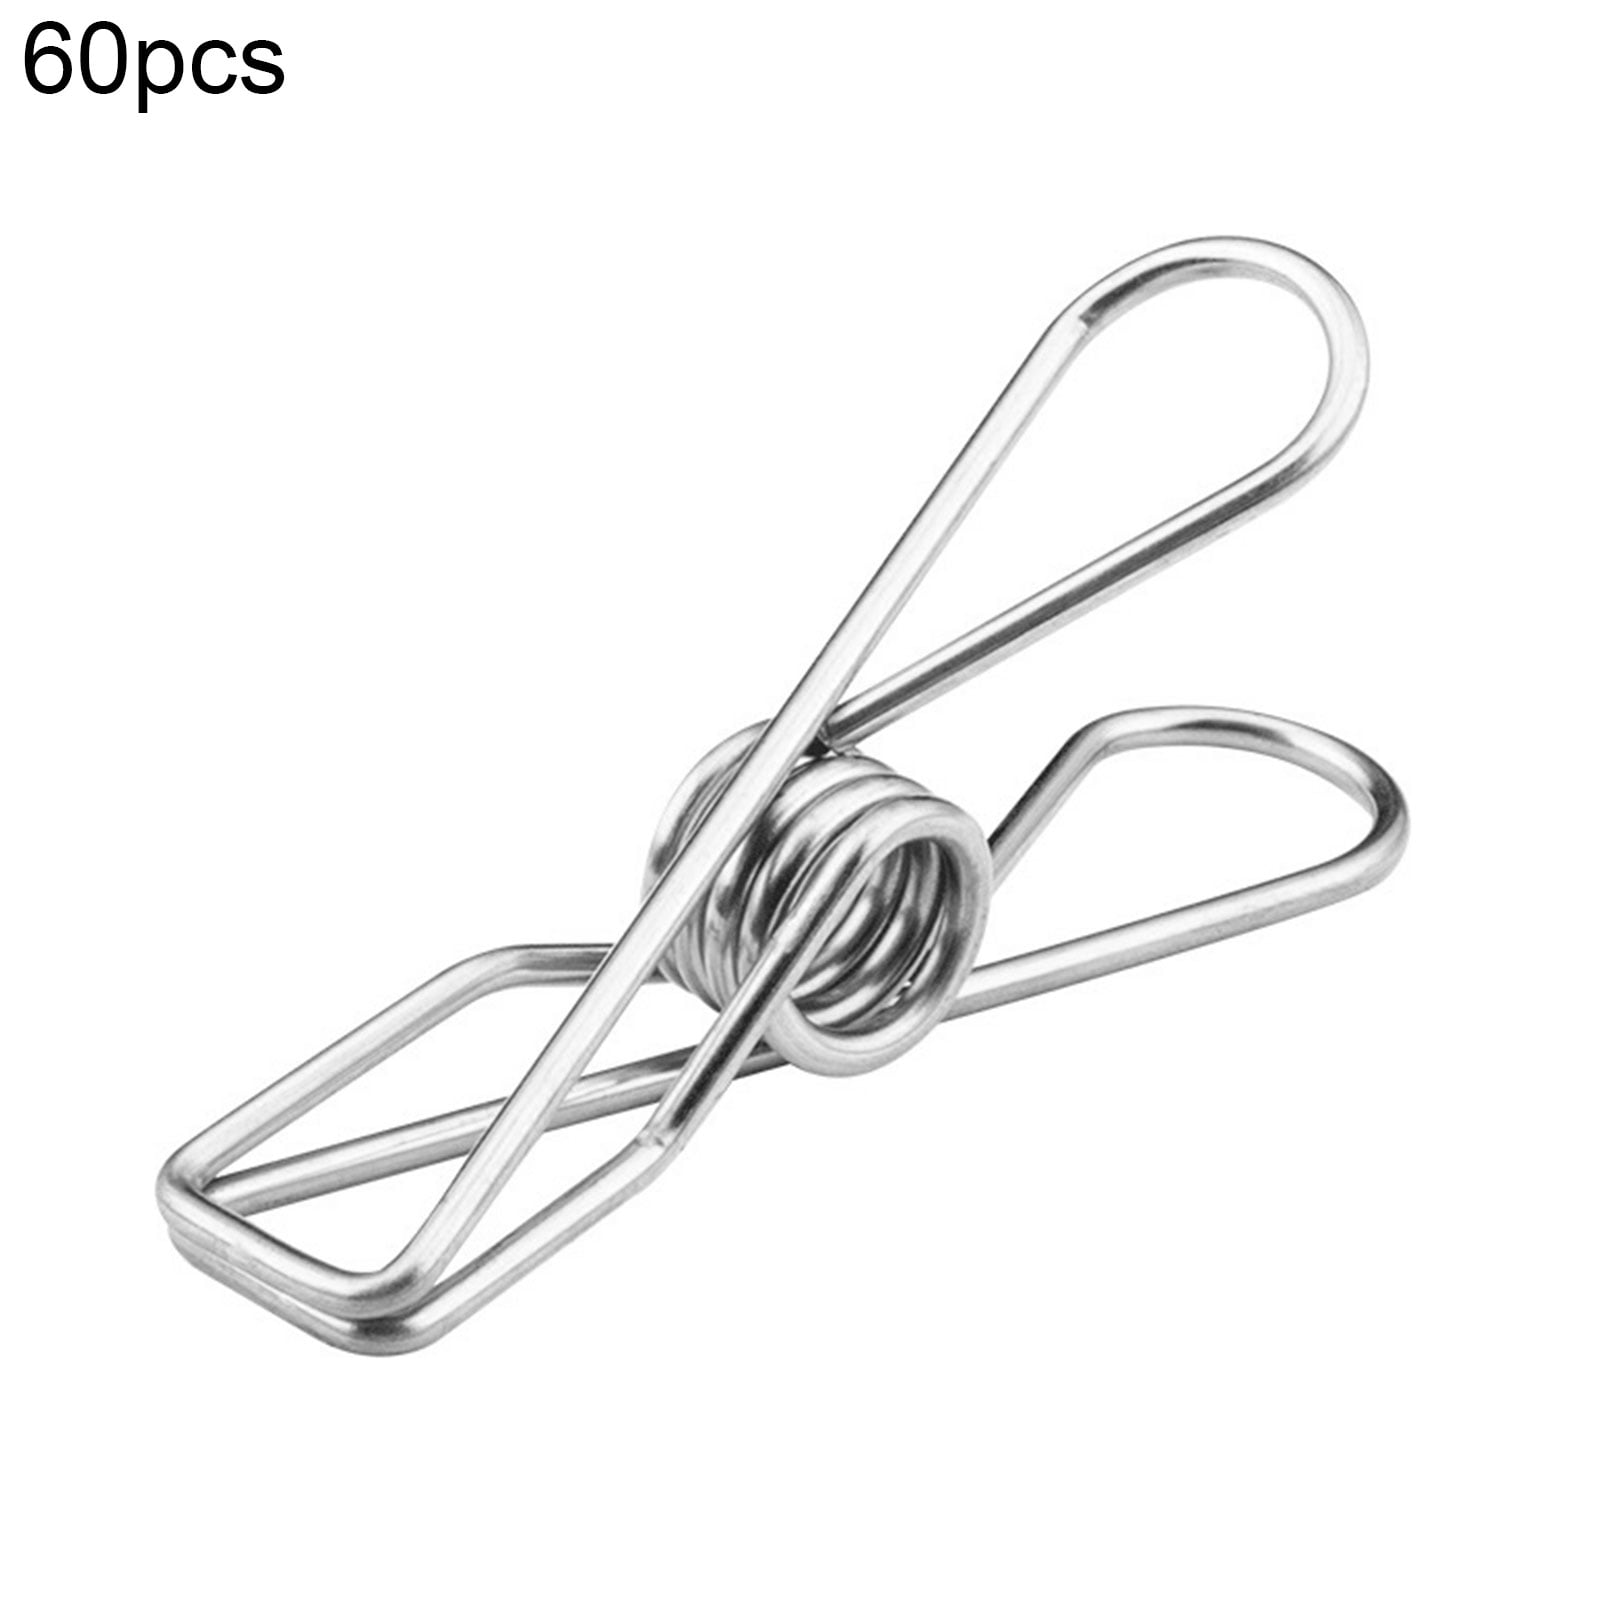 Details about   Multi-use Metal Wire Clips Fastener For Drying Laundry Clothespin Utility Clip 